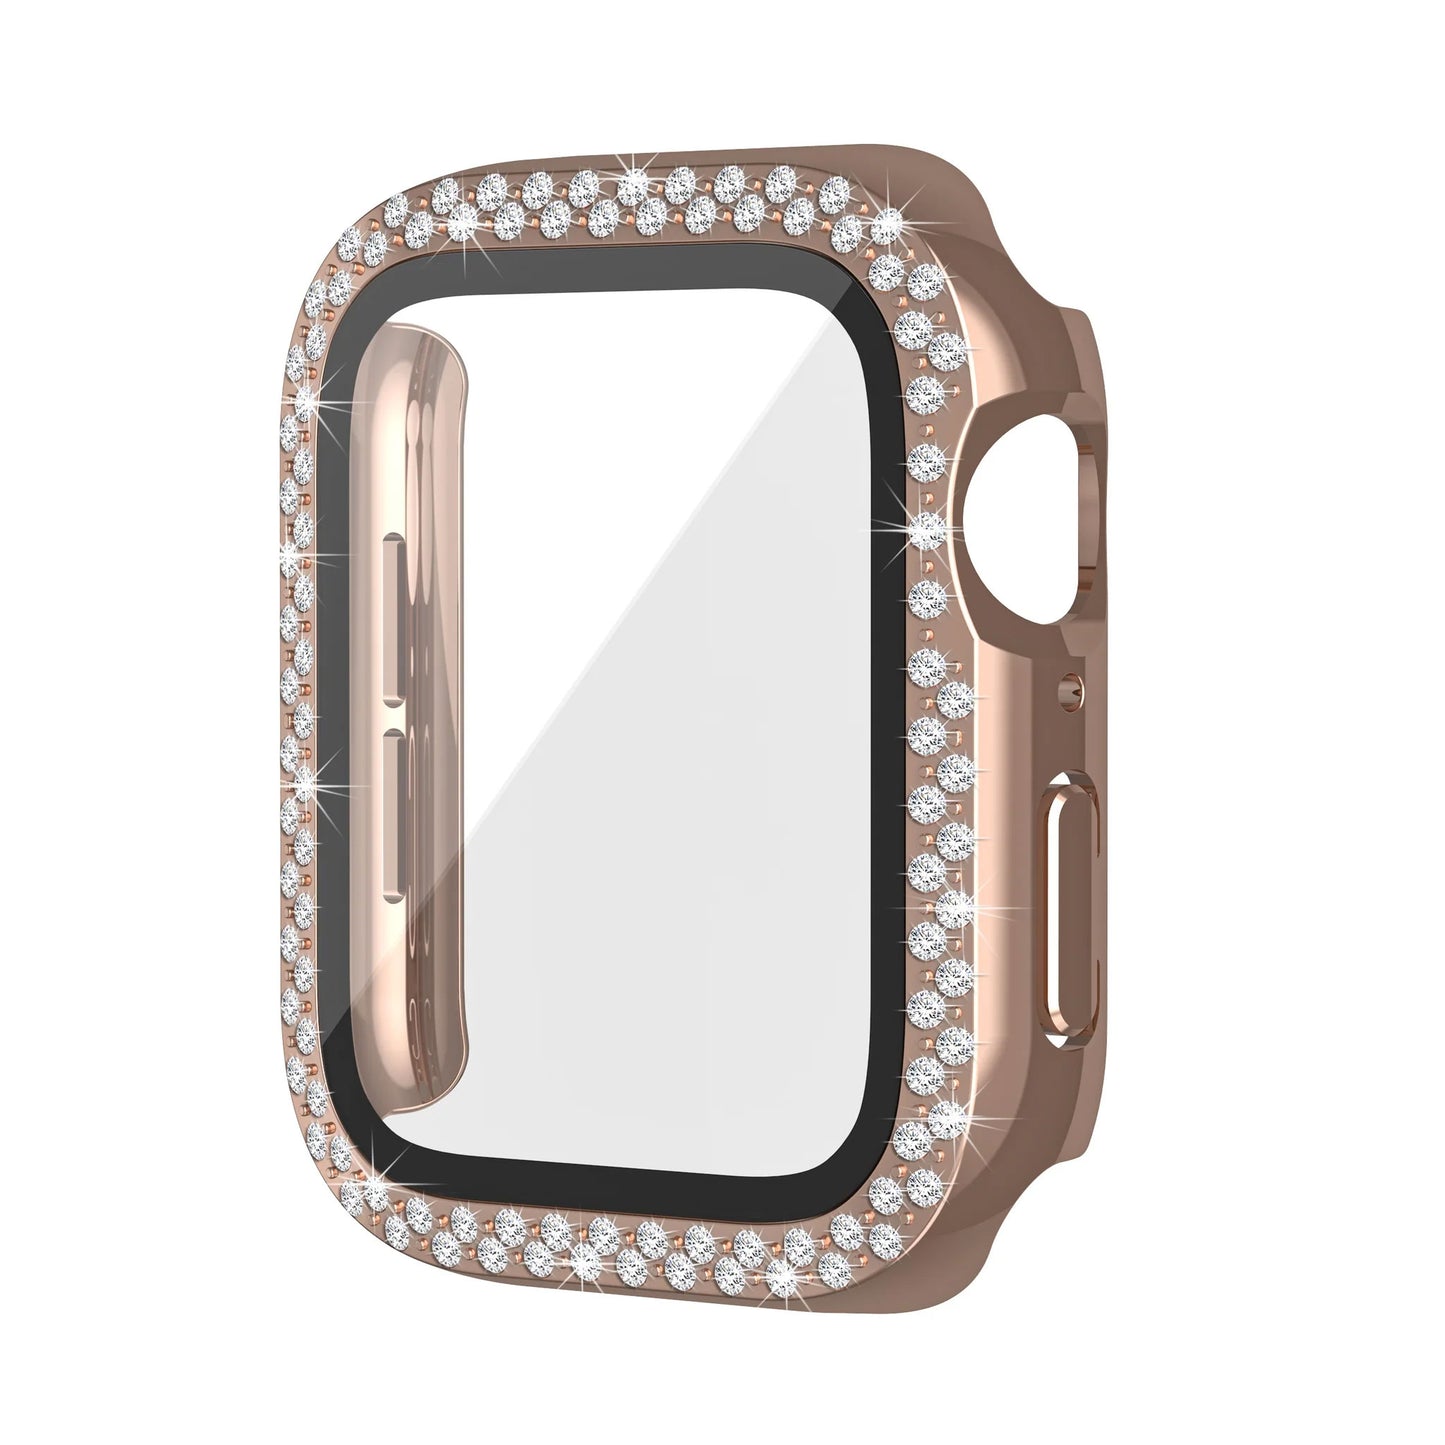 Bling Bumper Case with Tempered Glass Screen Protector Compatible with Apple Watch 38mm